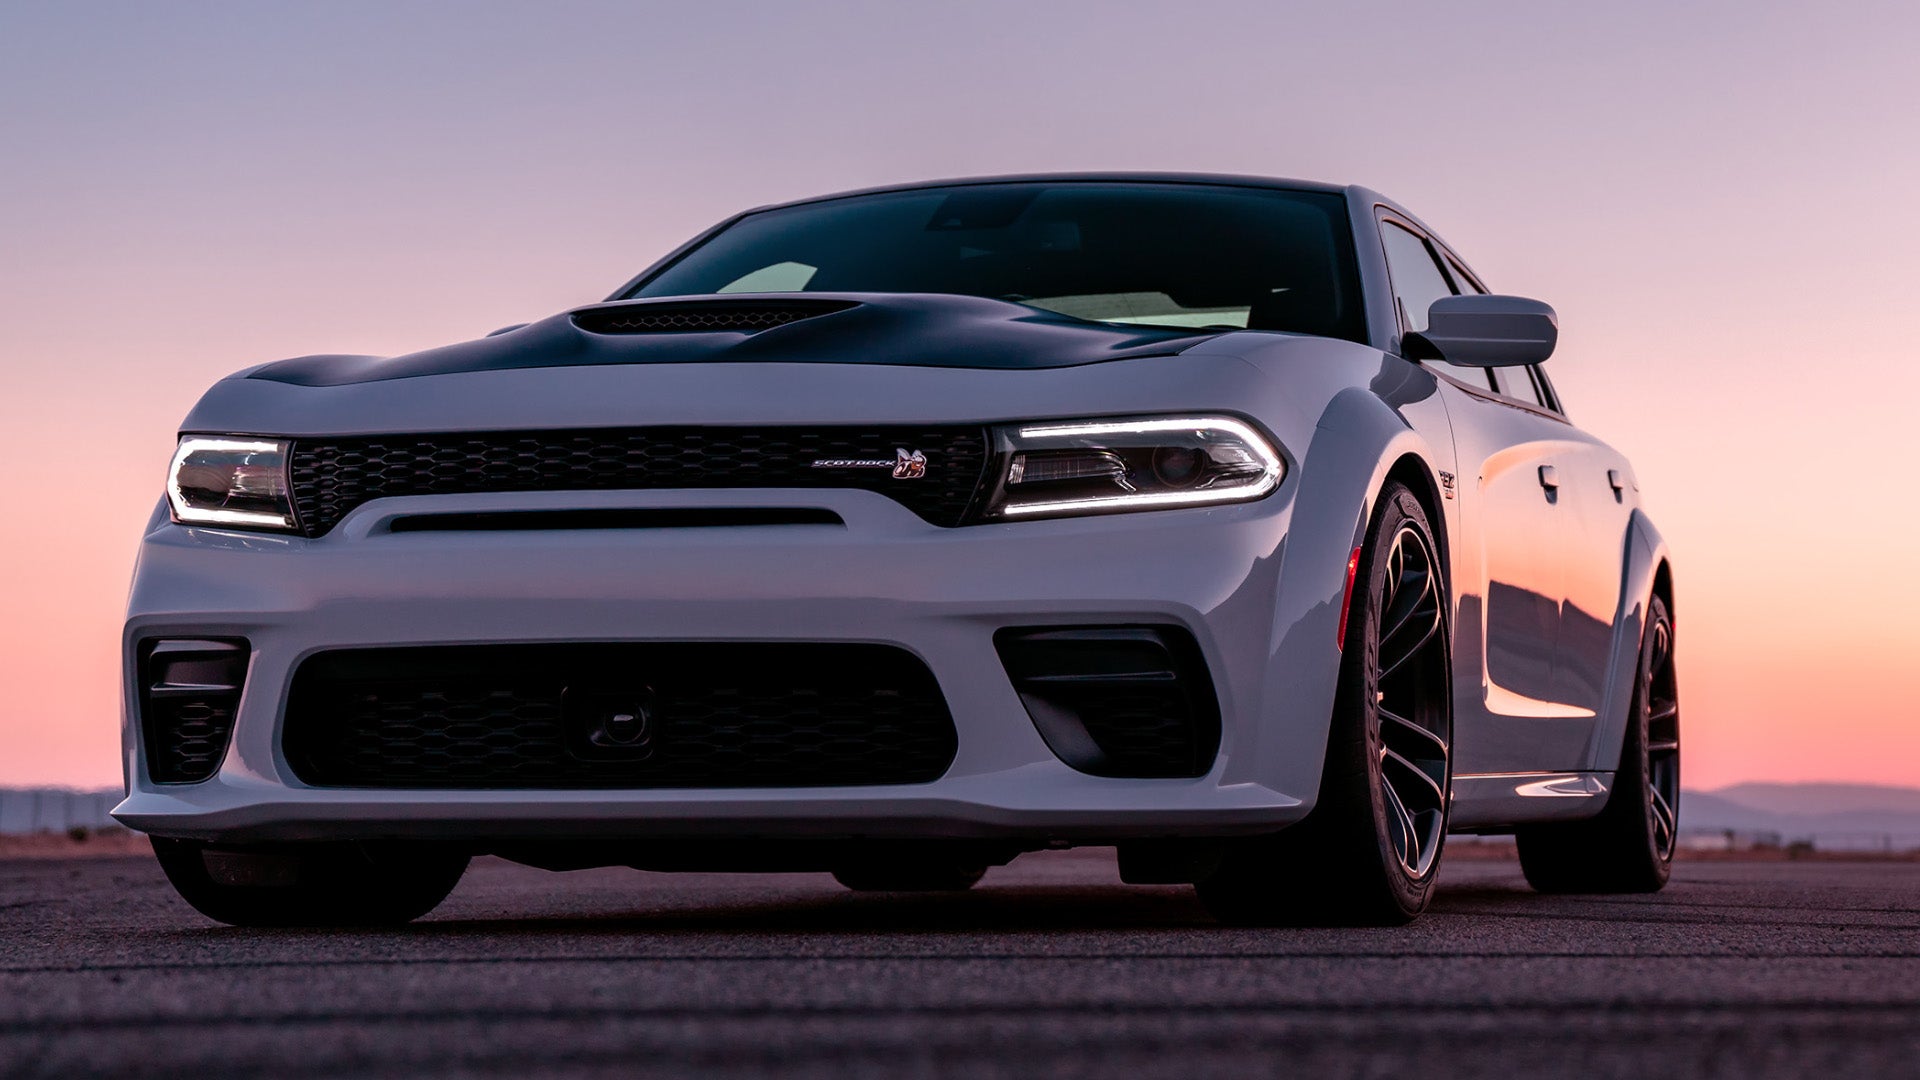 Dodge Challenger, Charger and Hellcat Engines Will Die By 2024